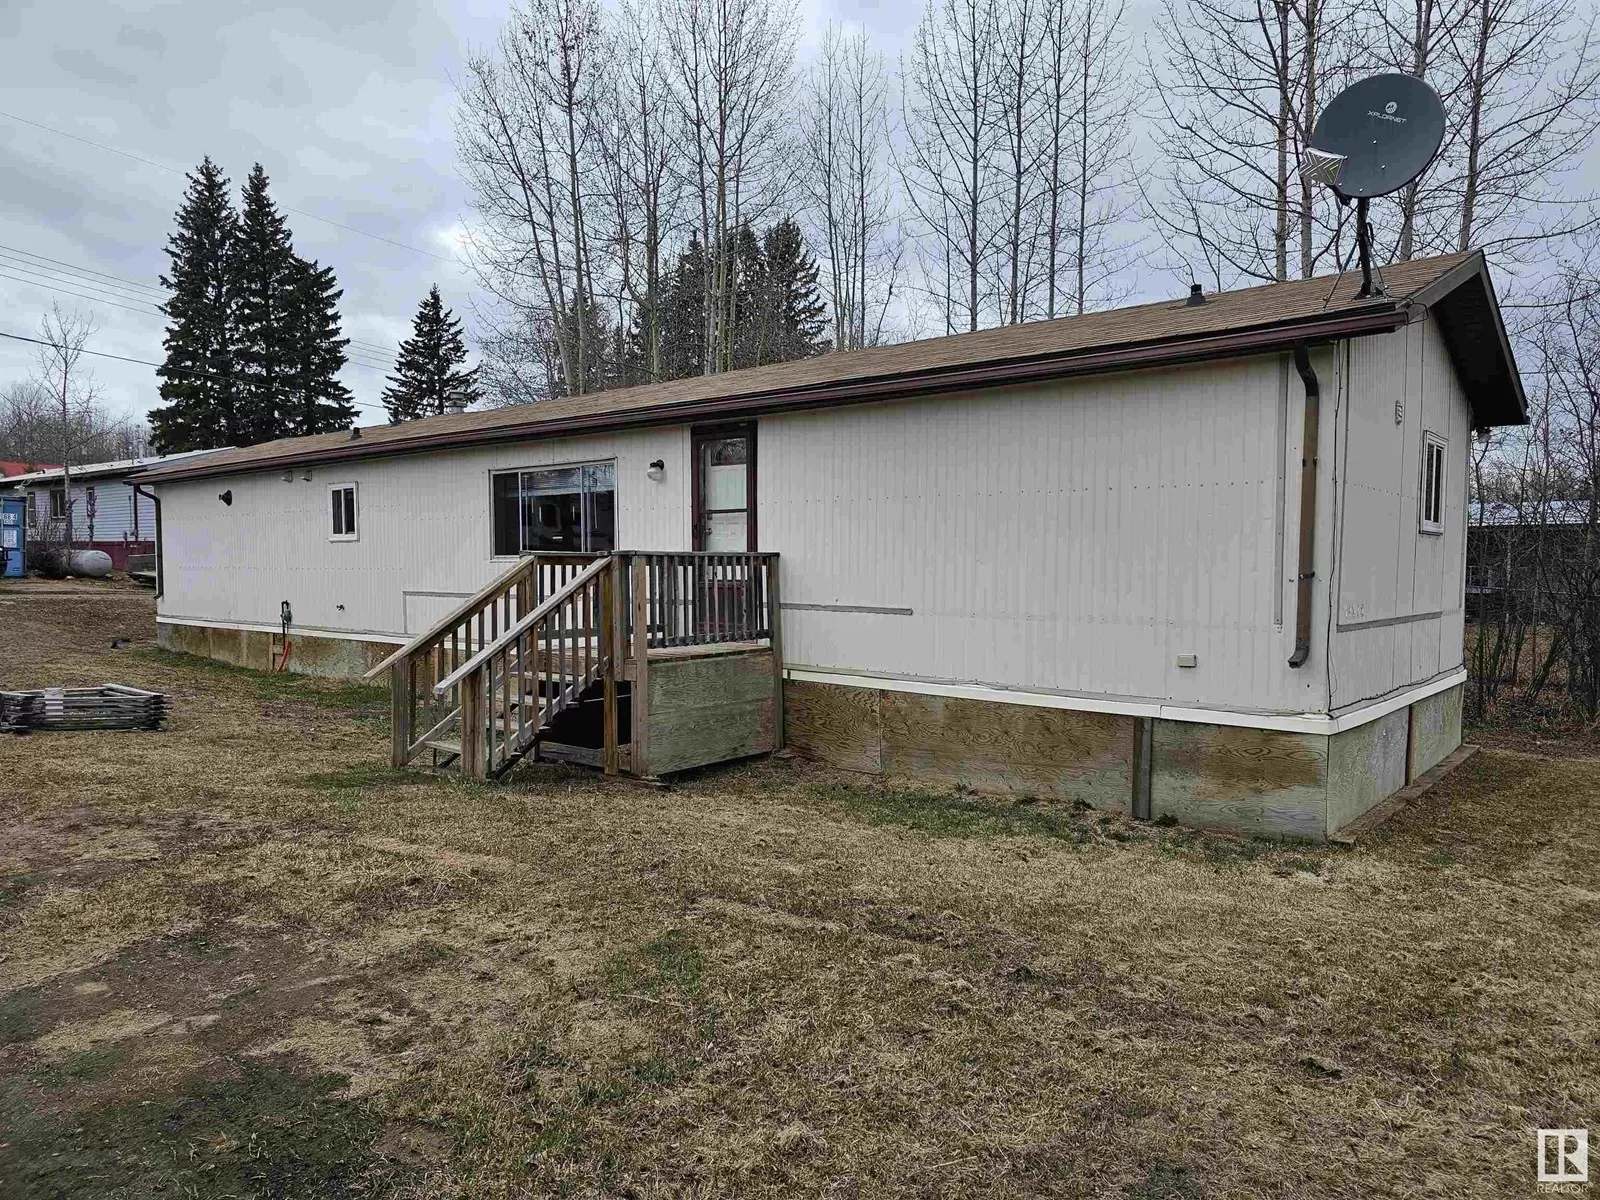 House for rent: 5205 45 St, Lodgepole, Alberta T0E 1K0